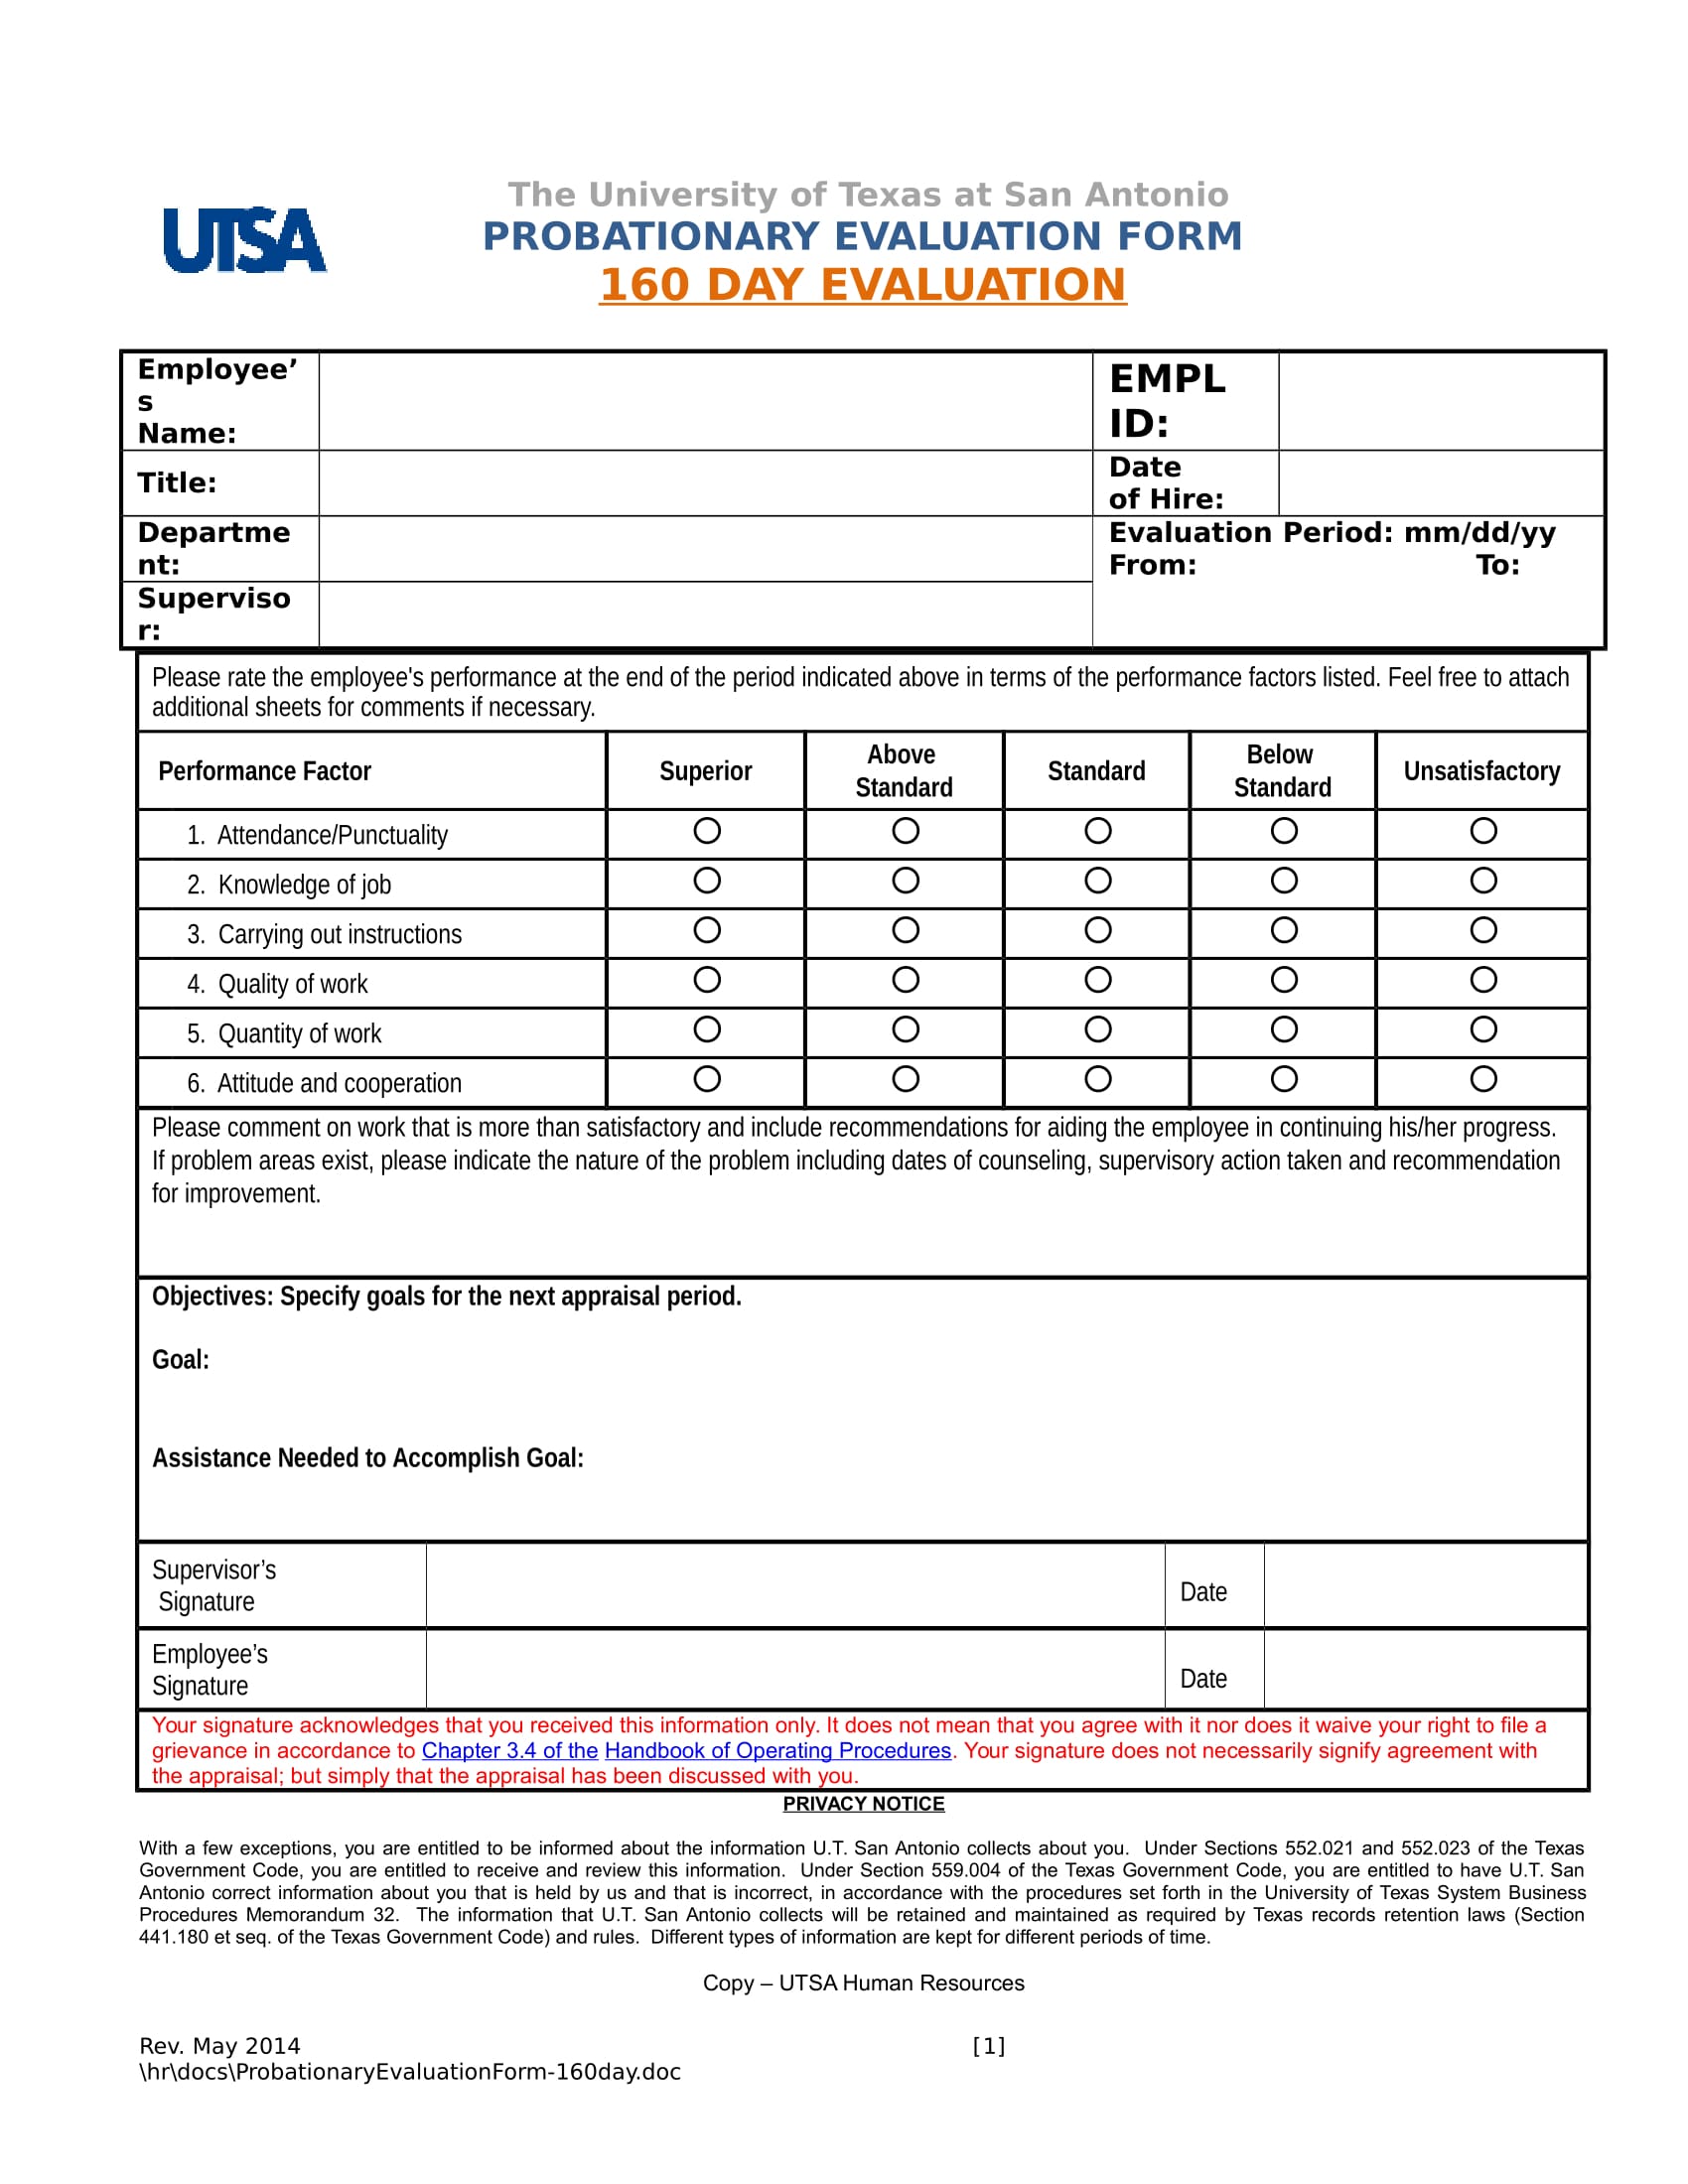 160 day probationary evaluation form 1